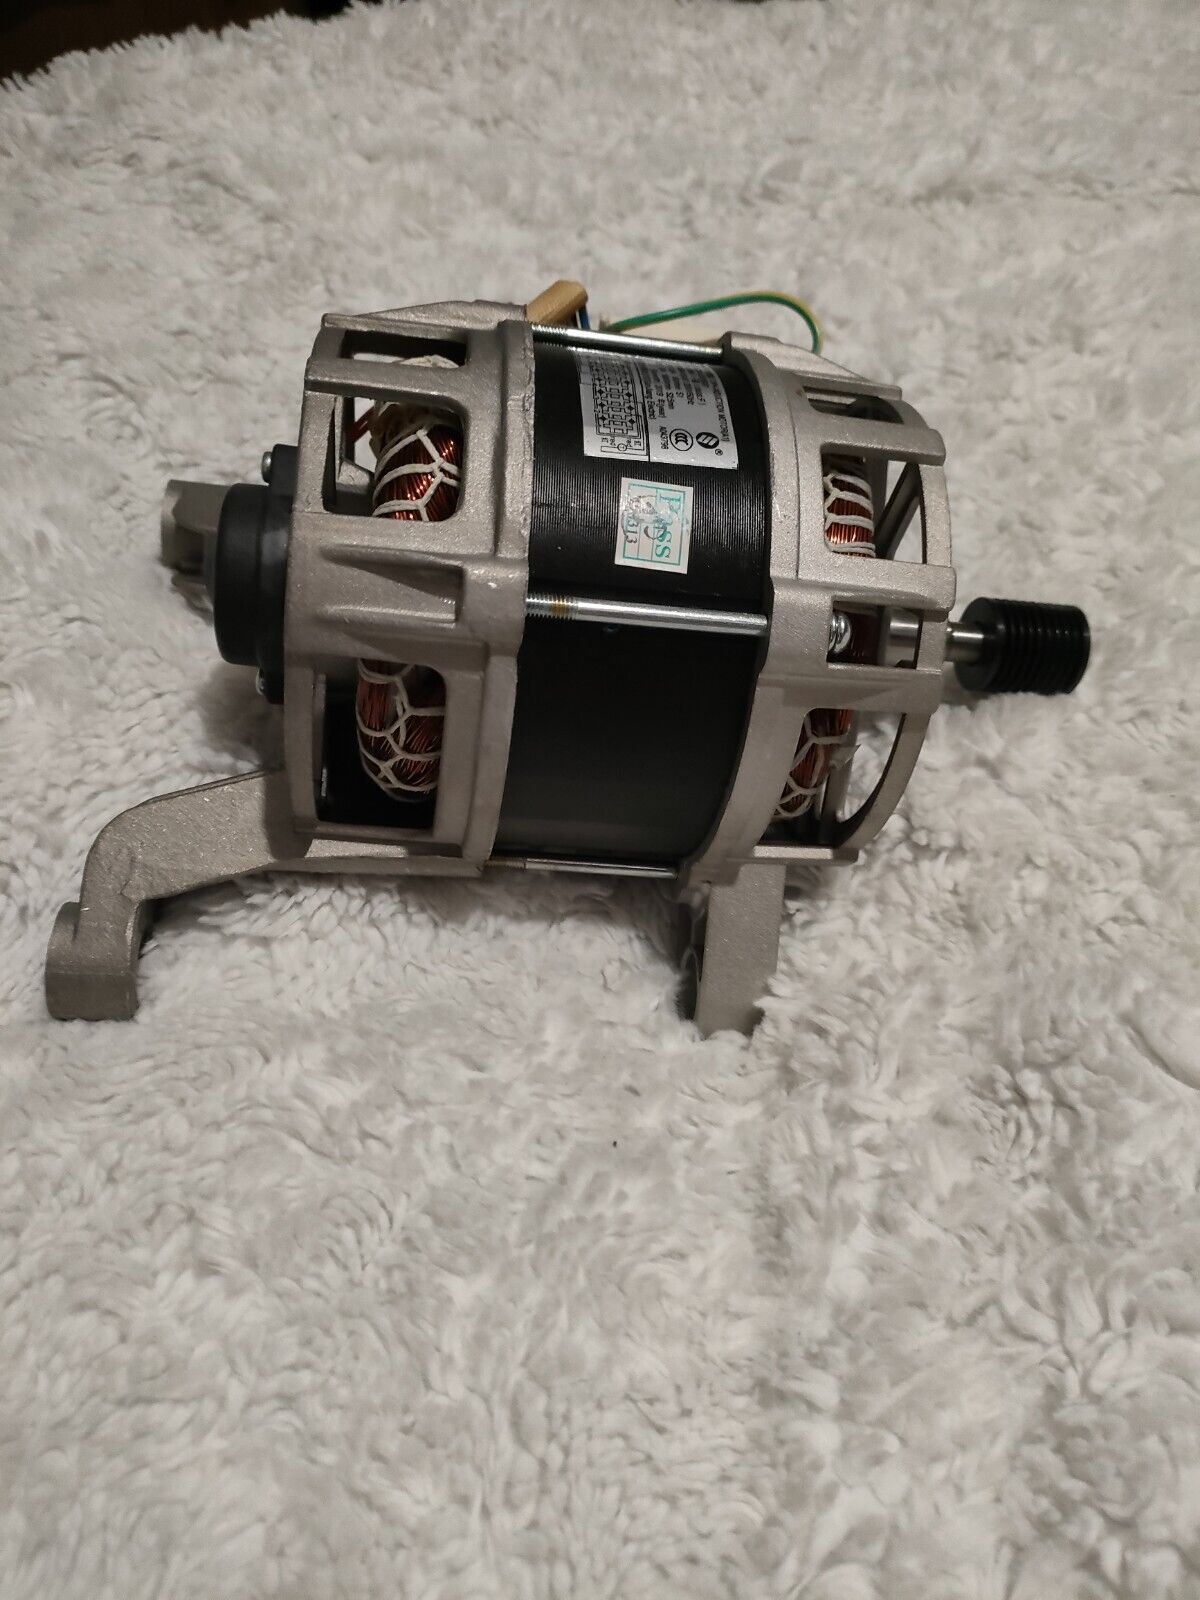 HOOVER WASHER DRYER 8+5KG wdxoa4106hcb5-80 MOTOR   TESTED, WORKING 